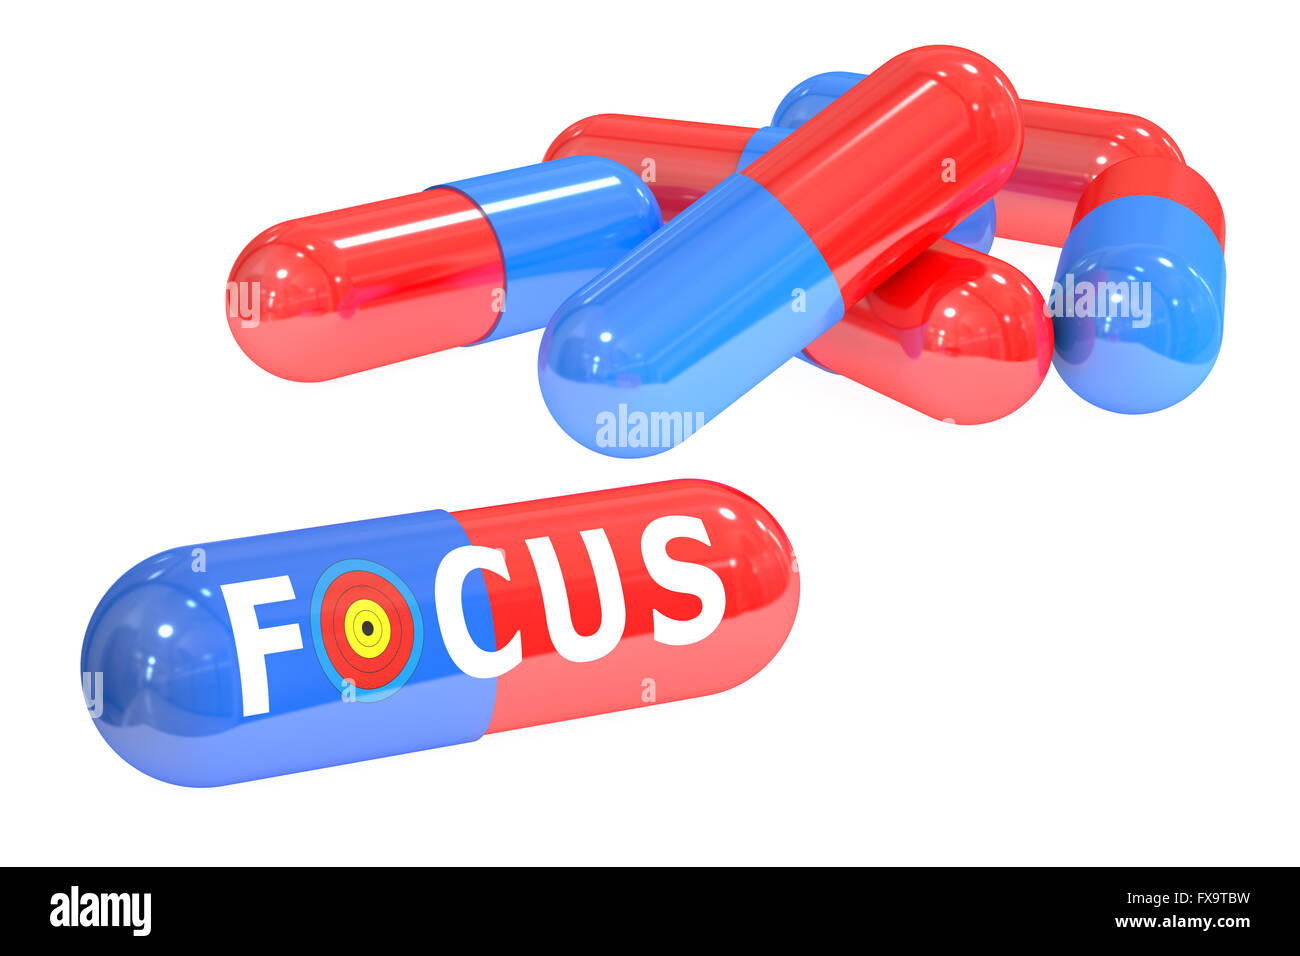 focus pills, 3D rendering isolated on white background Stock Photo